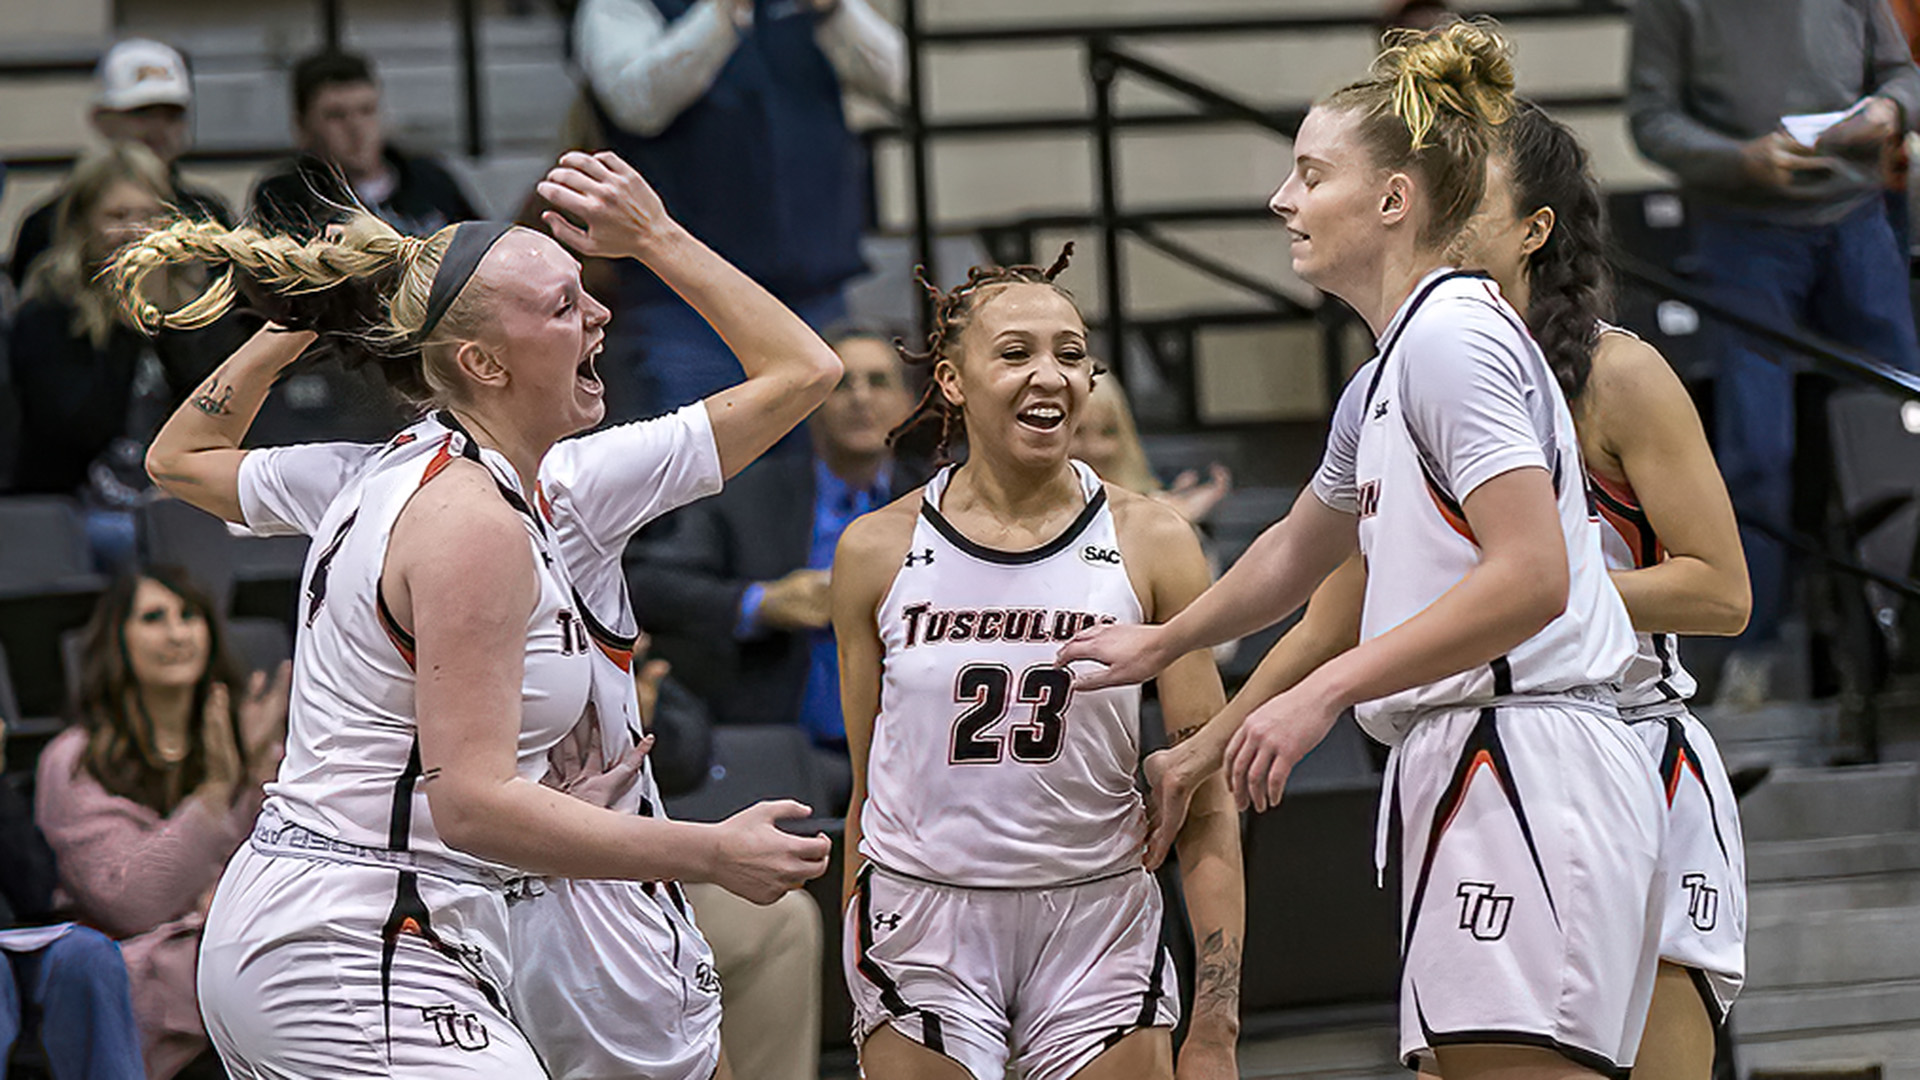 From left, Jenna Kallenberg, Mya Belton and Alyssa Walker celebrate as the Pioneers pick up a 54-38 win over 4th-ranked North Georgia (photo by Chuck Williams)